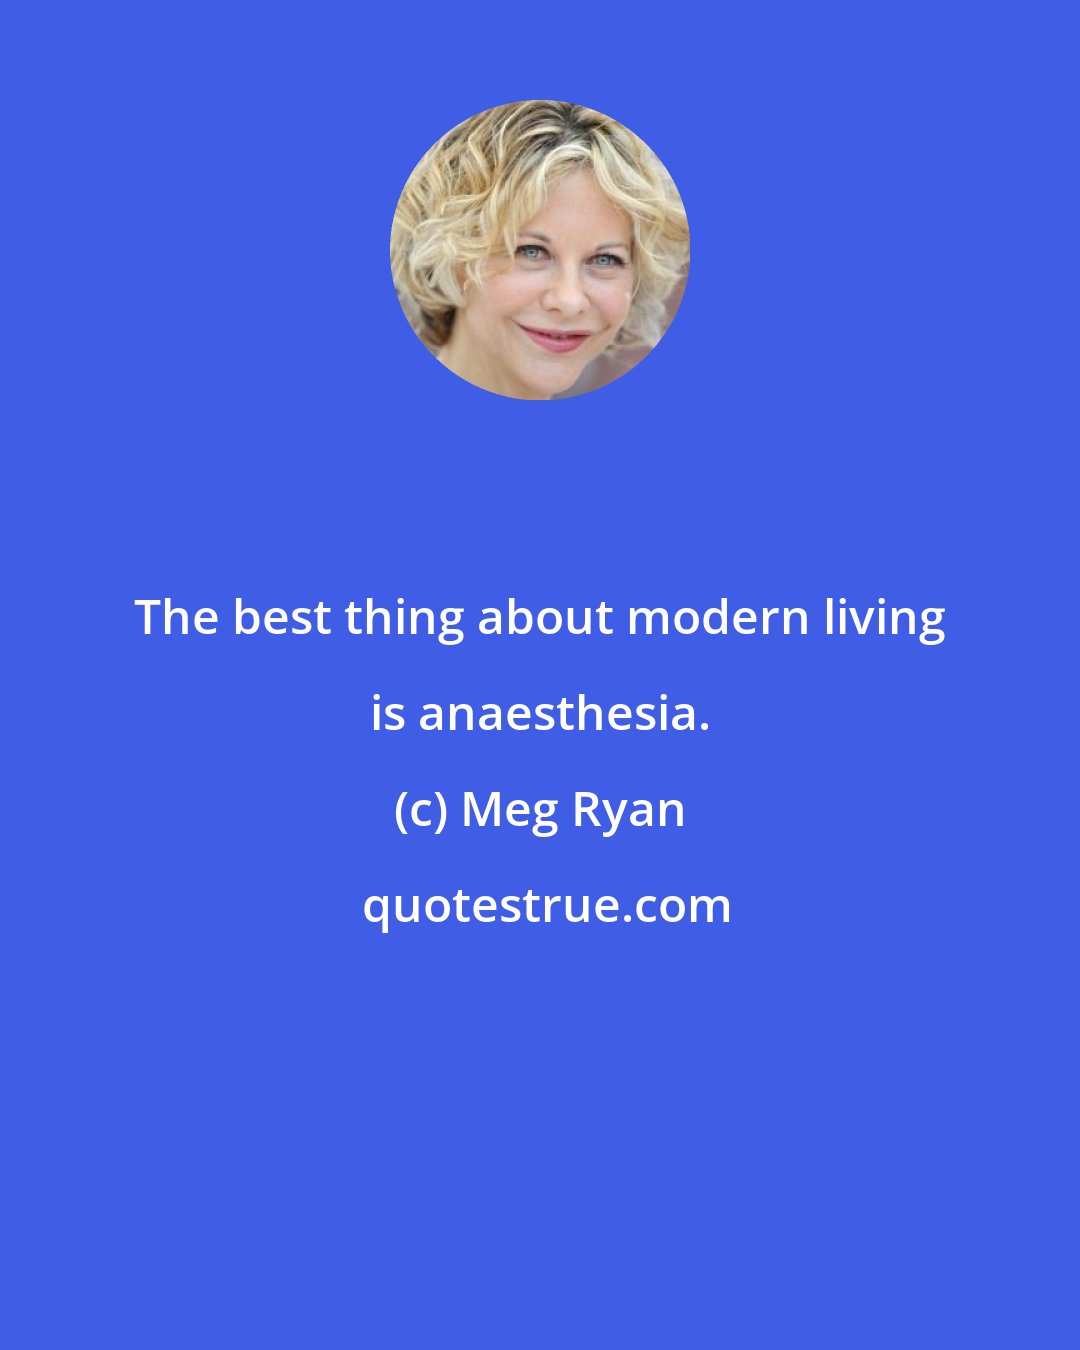 Meg Ryan: The best thing about modern living is anaesthesia.